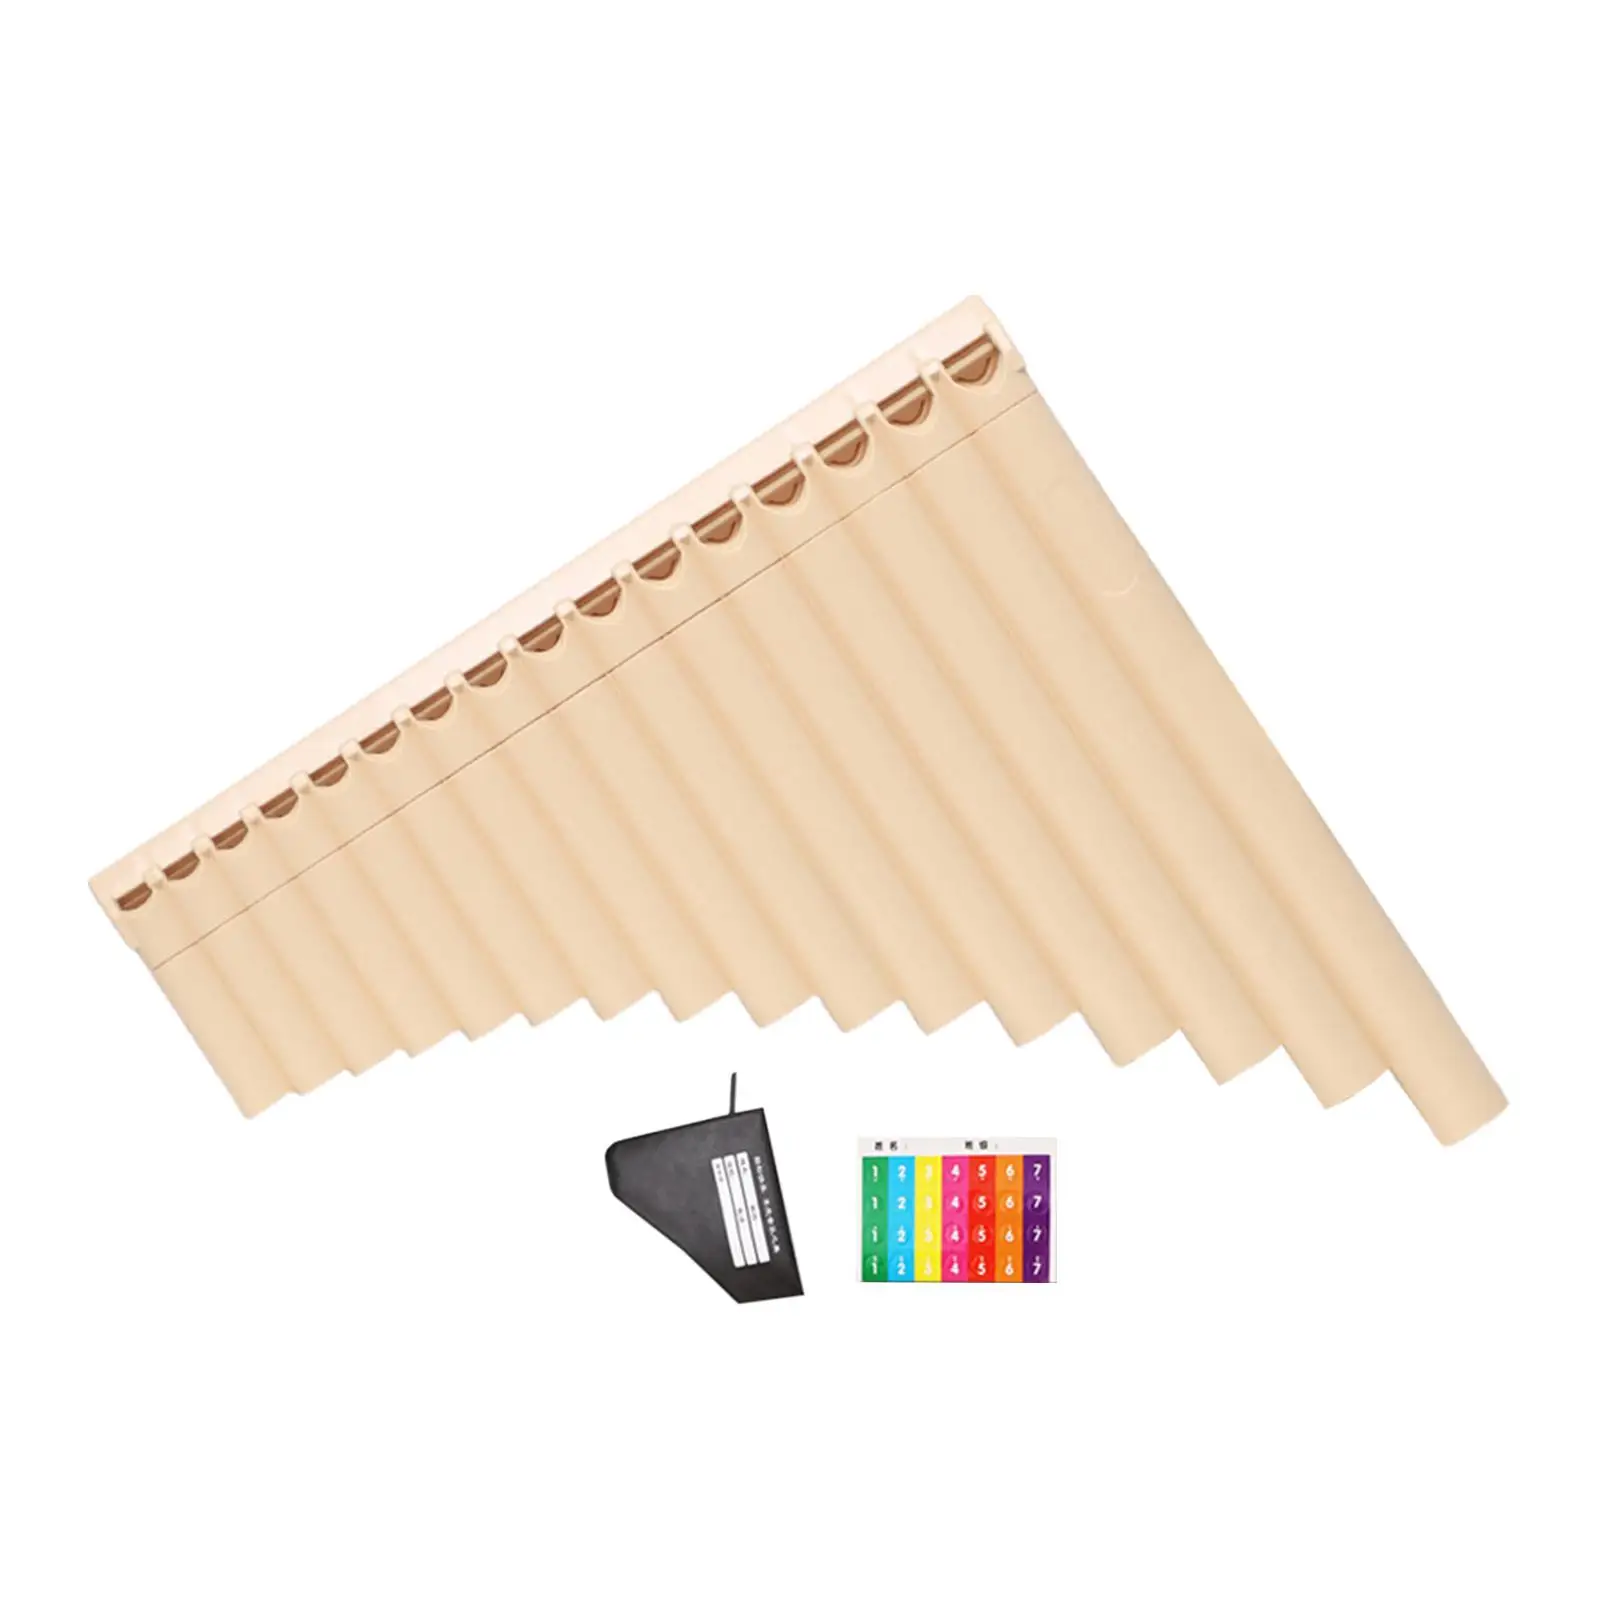 Pan Flute C Tone 16 Pipes Woodwind Instrument Traditional Fine Workmanship Sliding Mouth Blowing Musical Instrument Durable